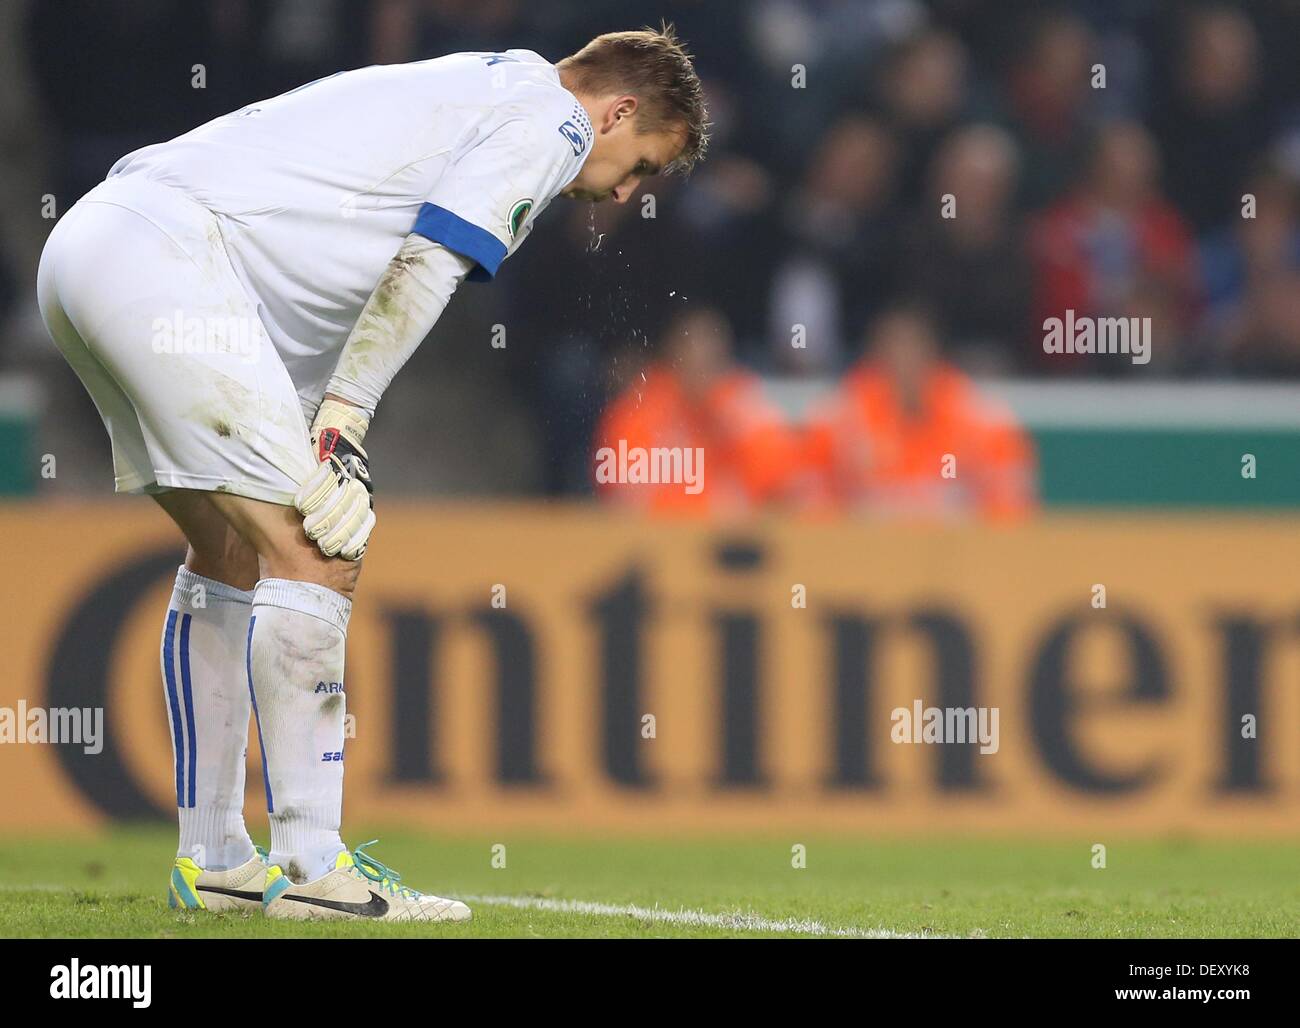 Bielefeld, Germany. 24th Sep, 2013. Bielefeld's goalkeeper Patrick Platins during the DFB Cup match between Arminia Bielefeld and Bayer Leverkusen at Schueco Arena in Bielefeld, Germany, 24 September 2013. Photo: FRISO GENTSCH/dpa/Alamy Live News Stock Photo